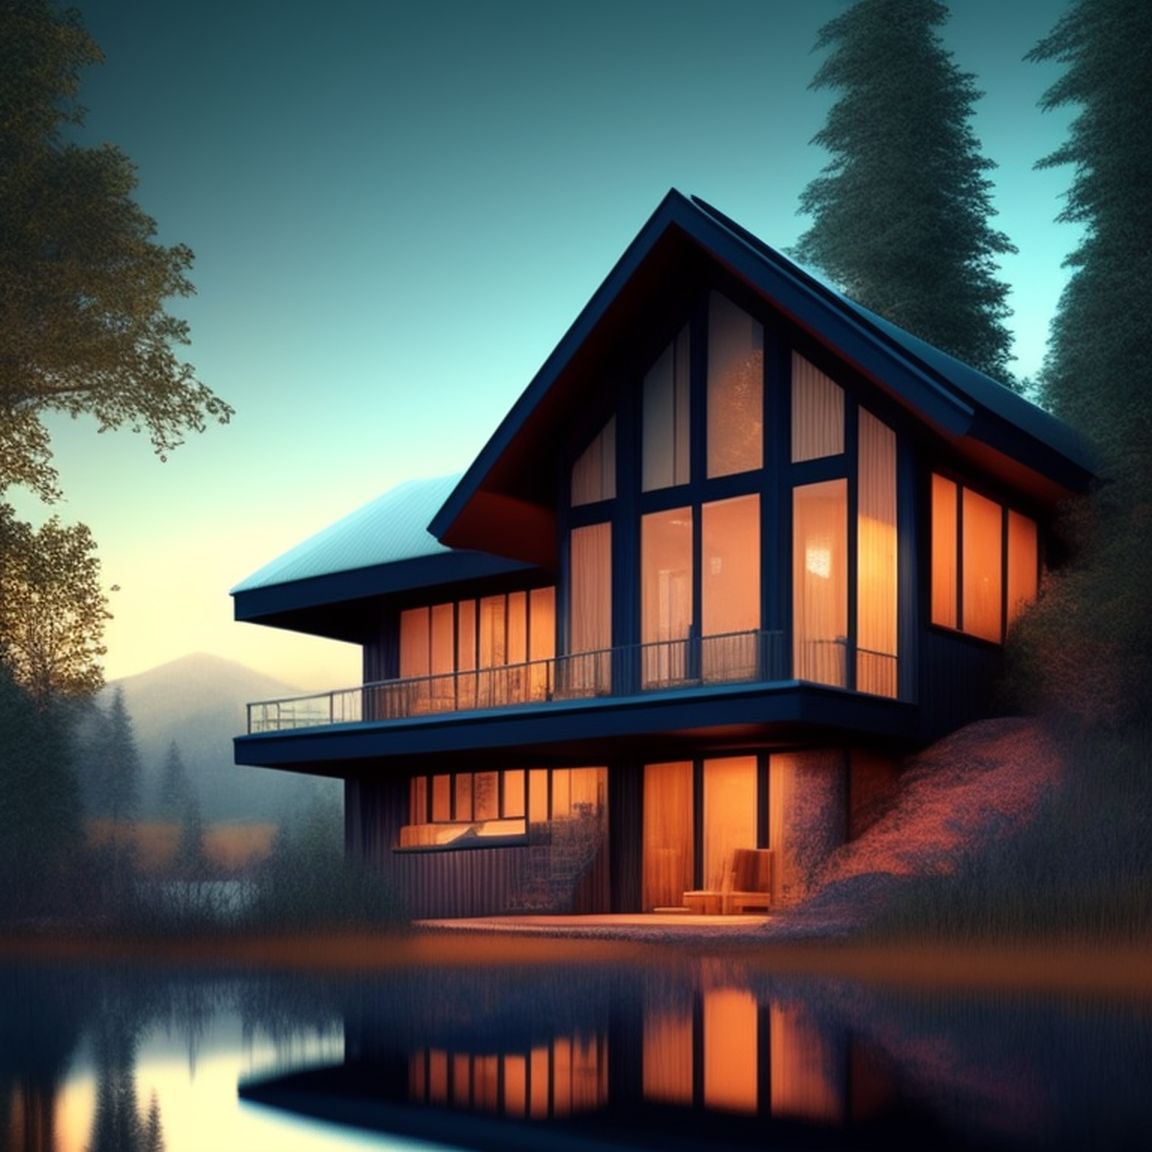 grand-ram987: /imagine prompt: A realistic cabin located in the middle of a  lush forest, with a sports car parked next to it, next to a beautiful blue  lake. The cabin should have